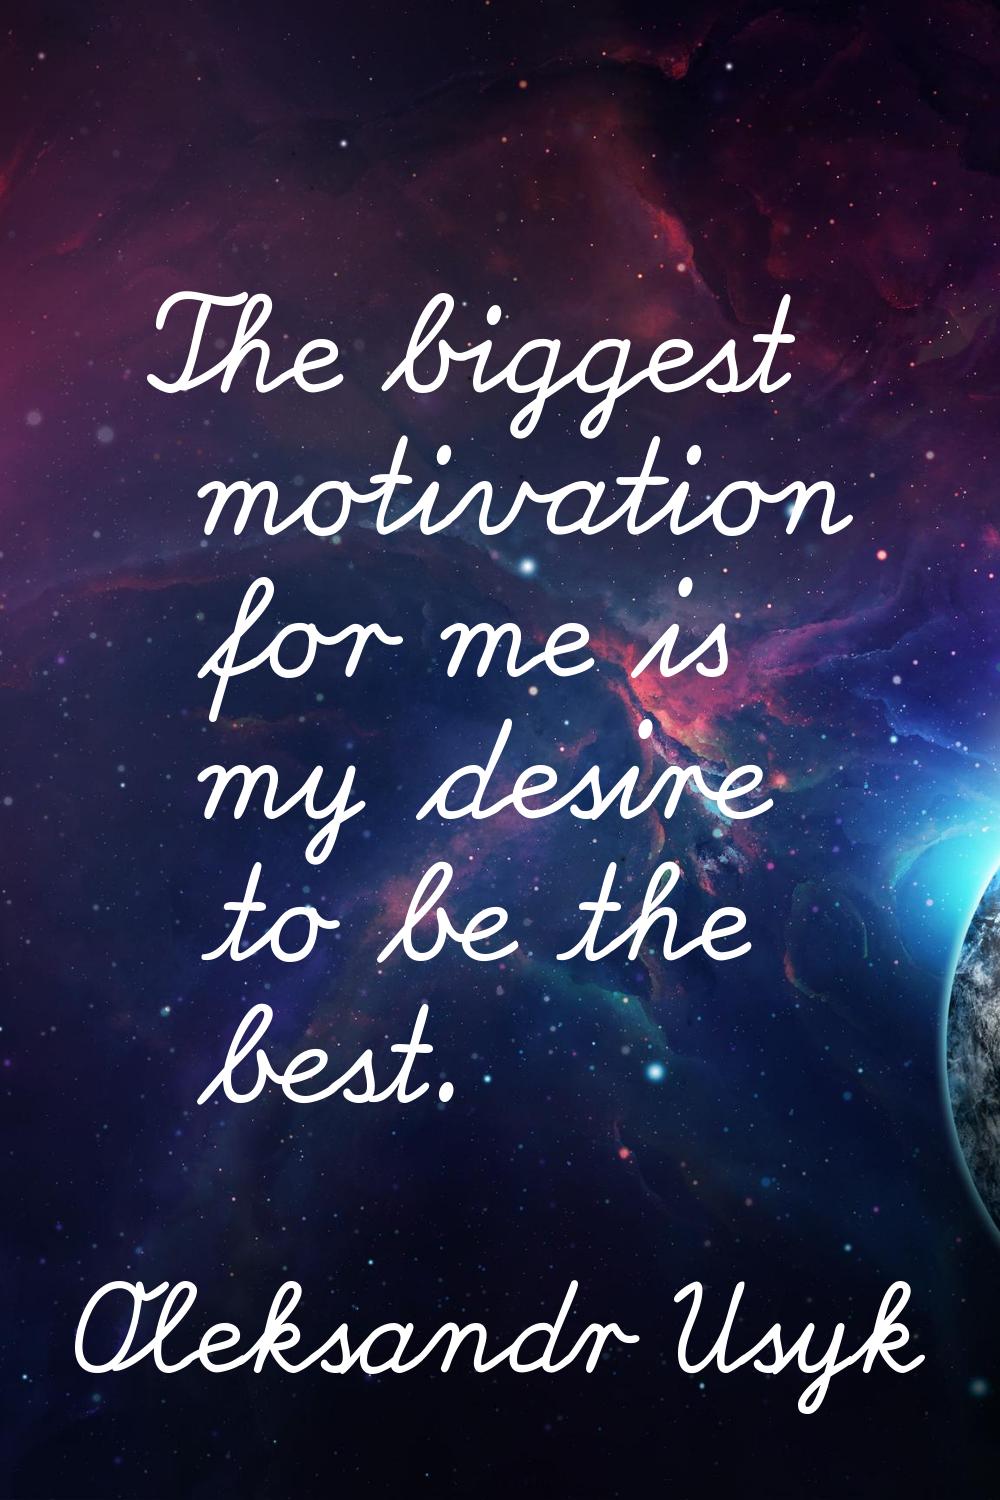 The biggest motivation for me is my desire to be the best.